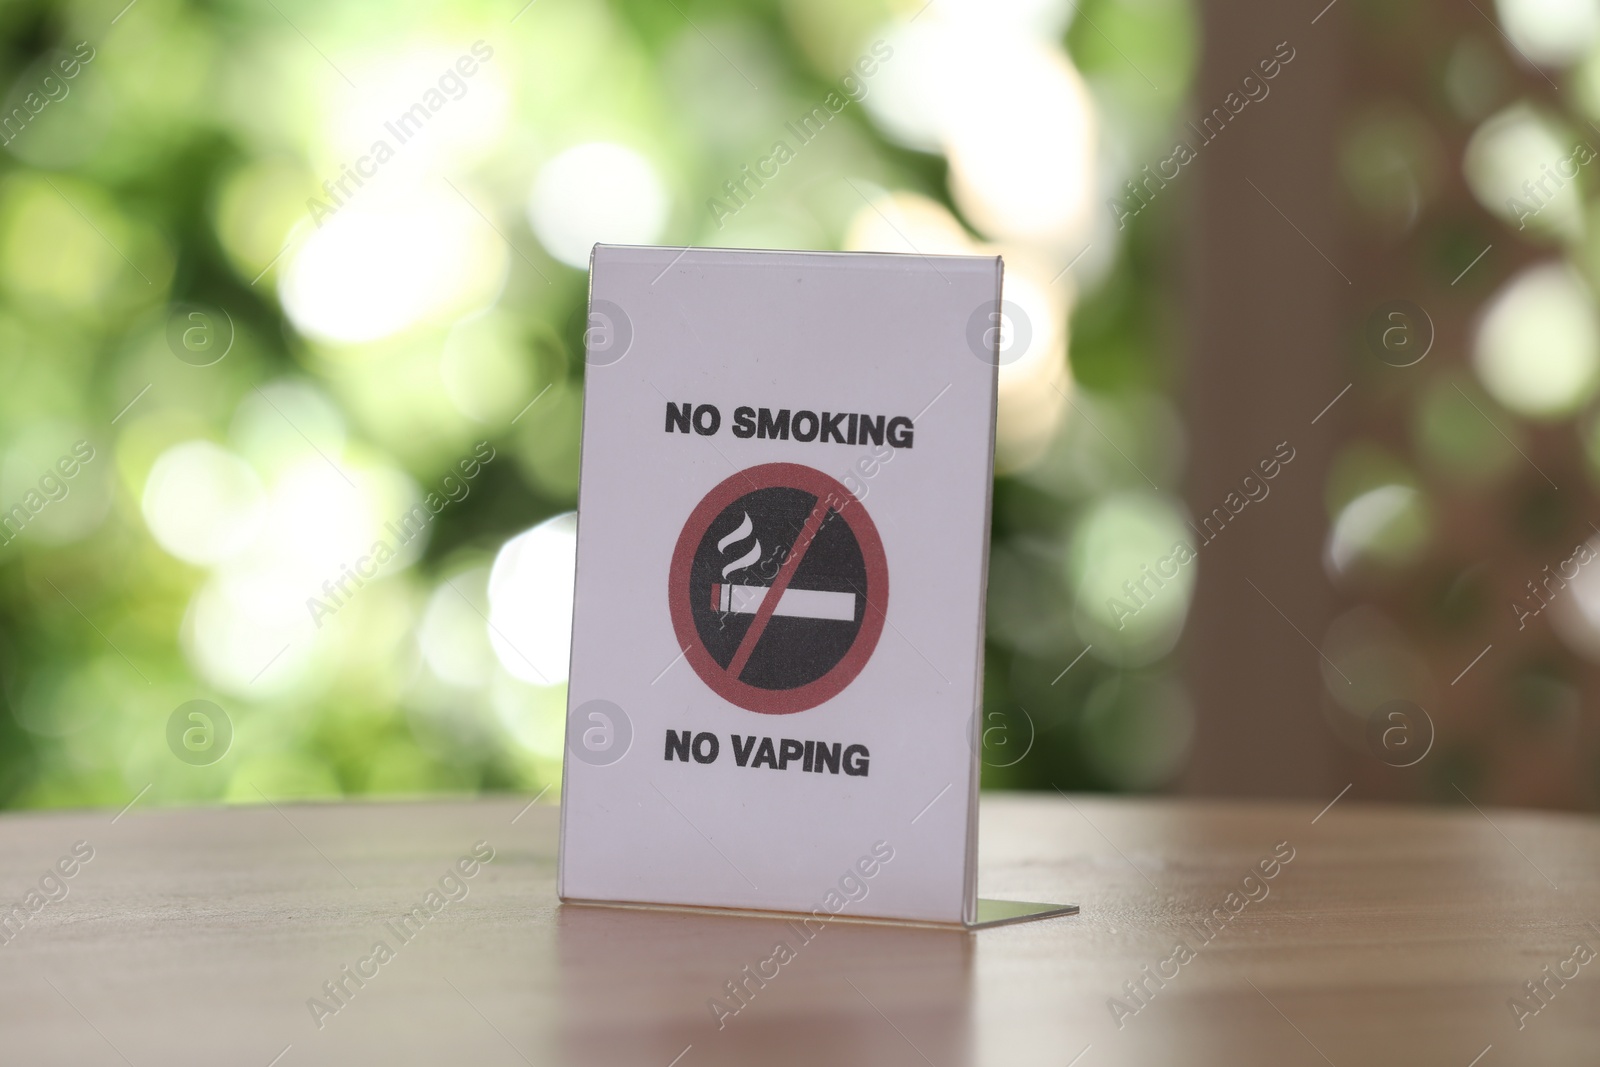 Photo of No Smoking No Vaping sign on wooden table against blurred background